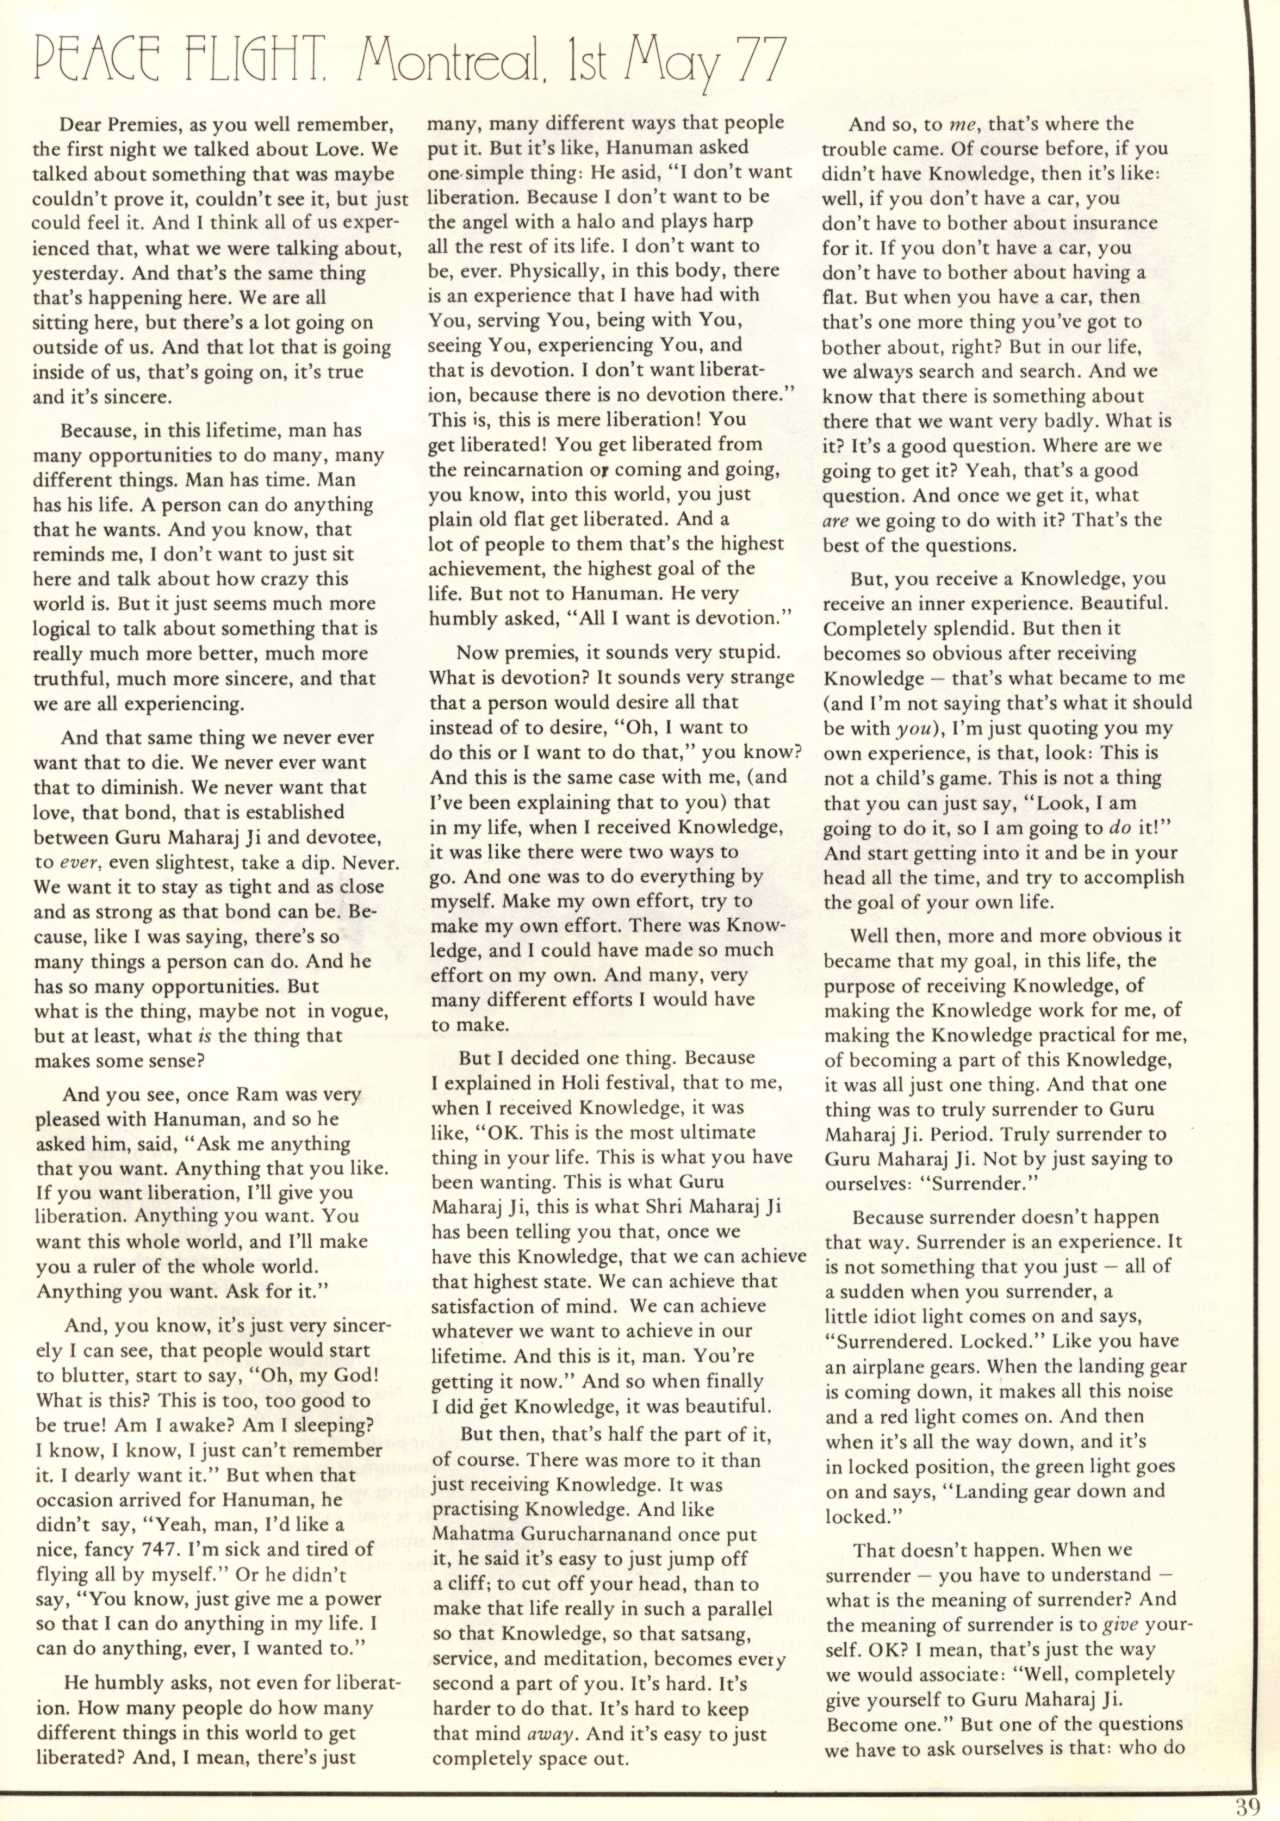 quote_magazine_peace_flight_montreal_may_1_1977_page_39.jpg 318.9K